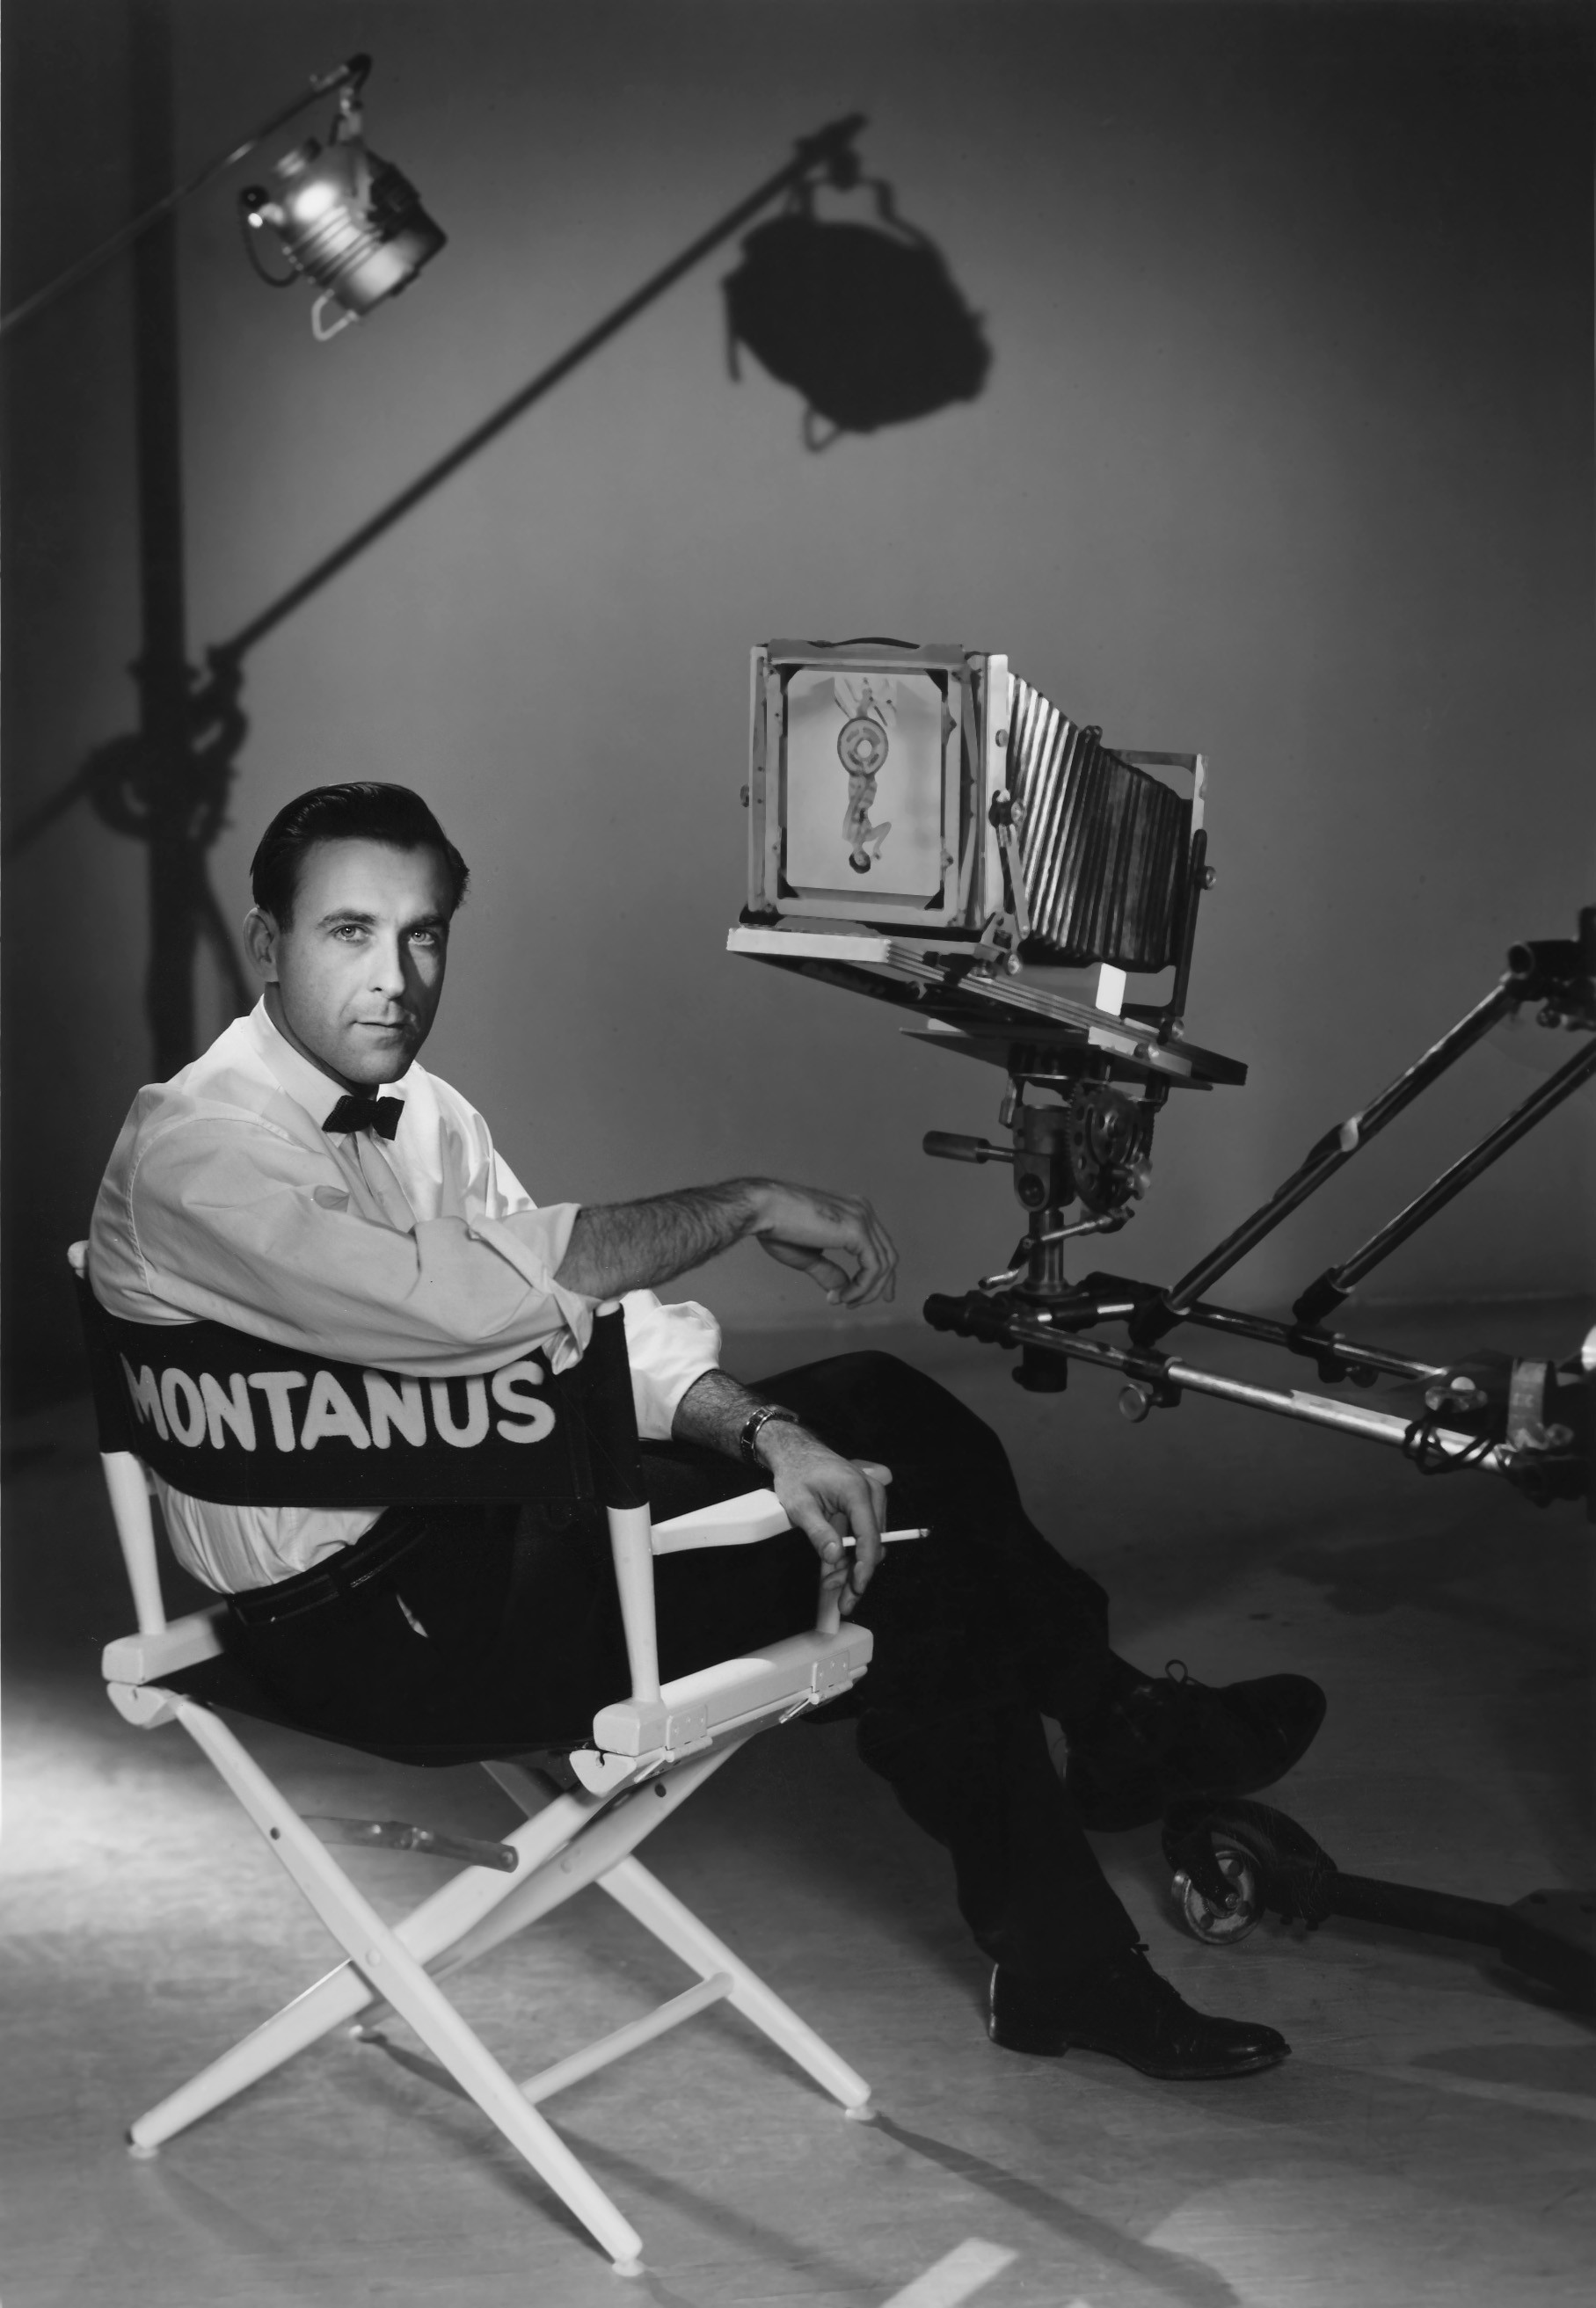 Photographic portrait of Neil Montanus wearing a white shirt and bow tie while seated in a director's chair with photographic equipment around him.